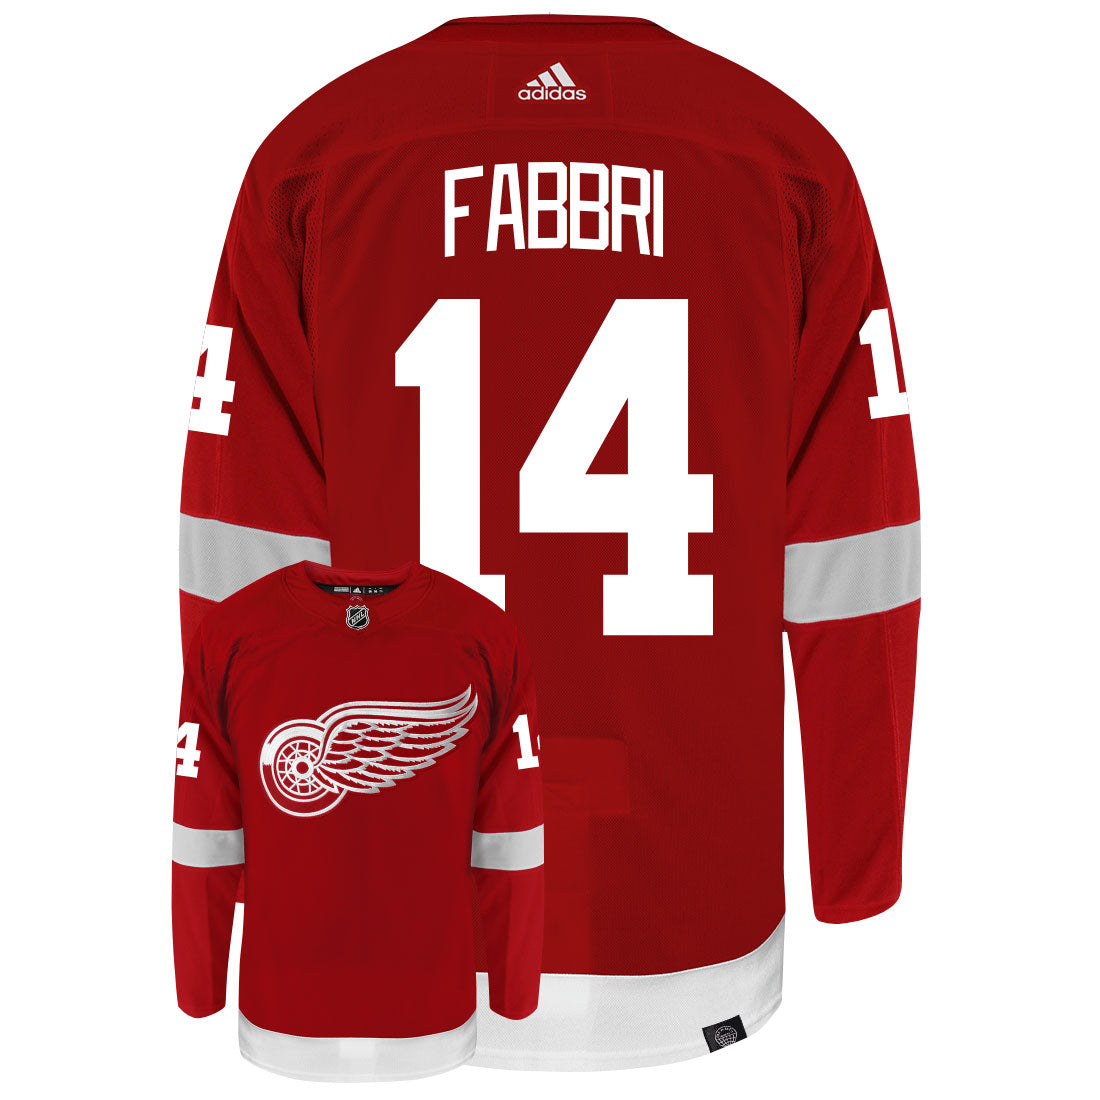 Robby Fabbri Detroit Red Wings Adidas Primegreen Authentic NHL Hockey Jersey